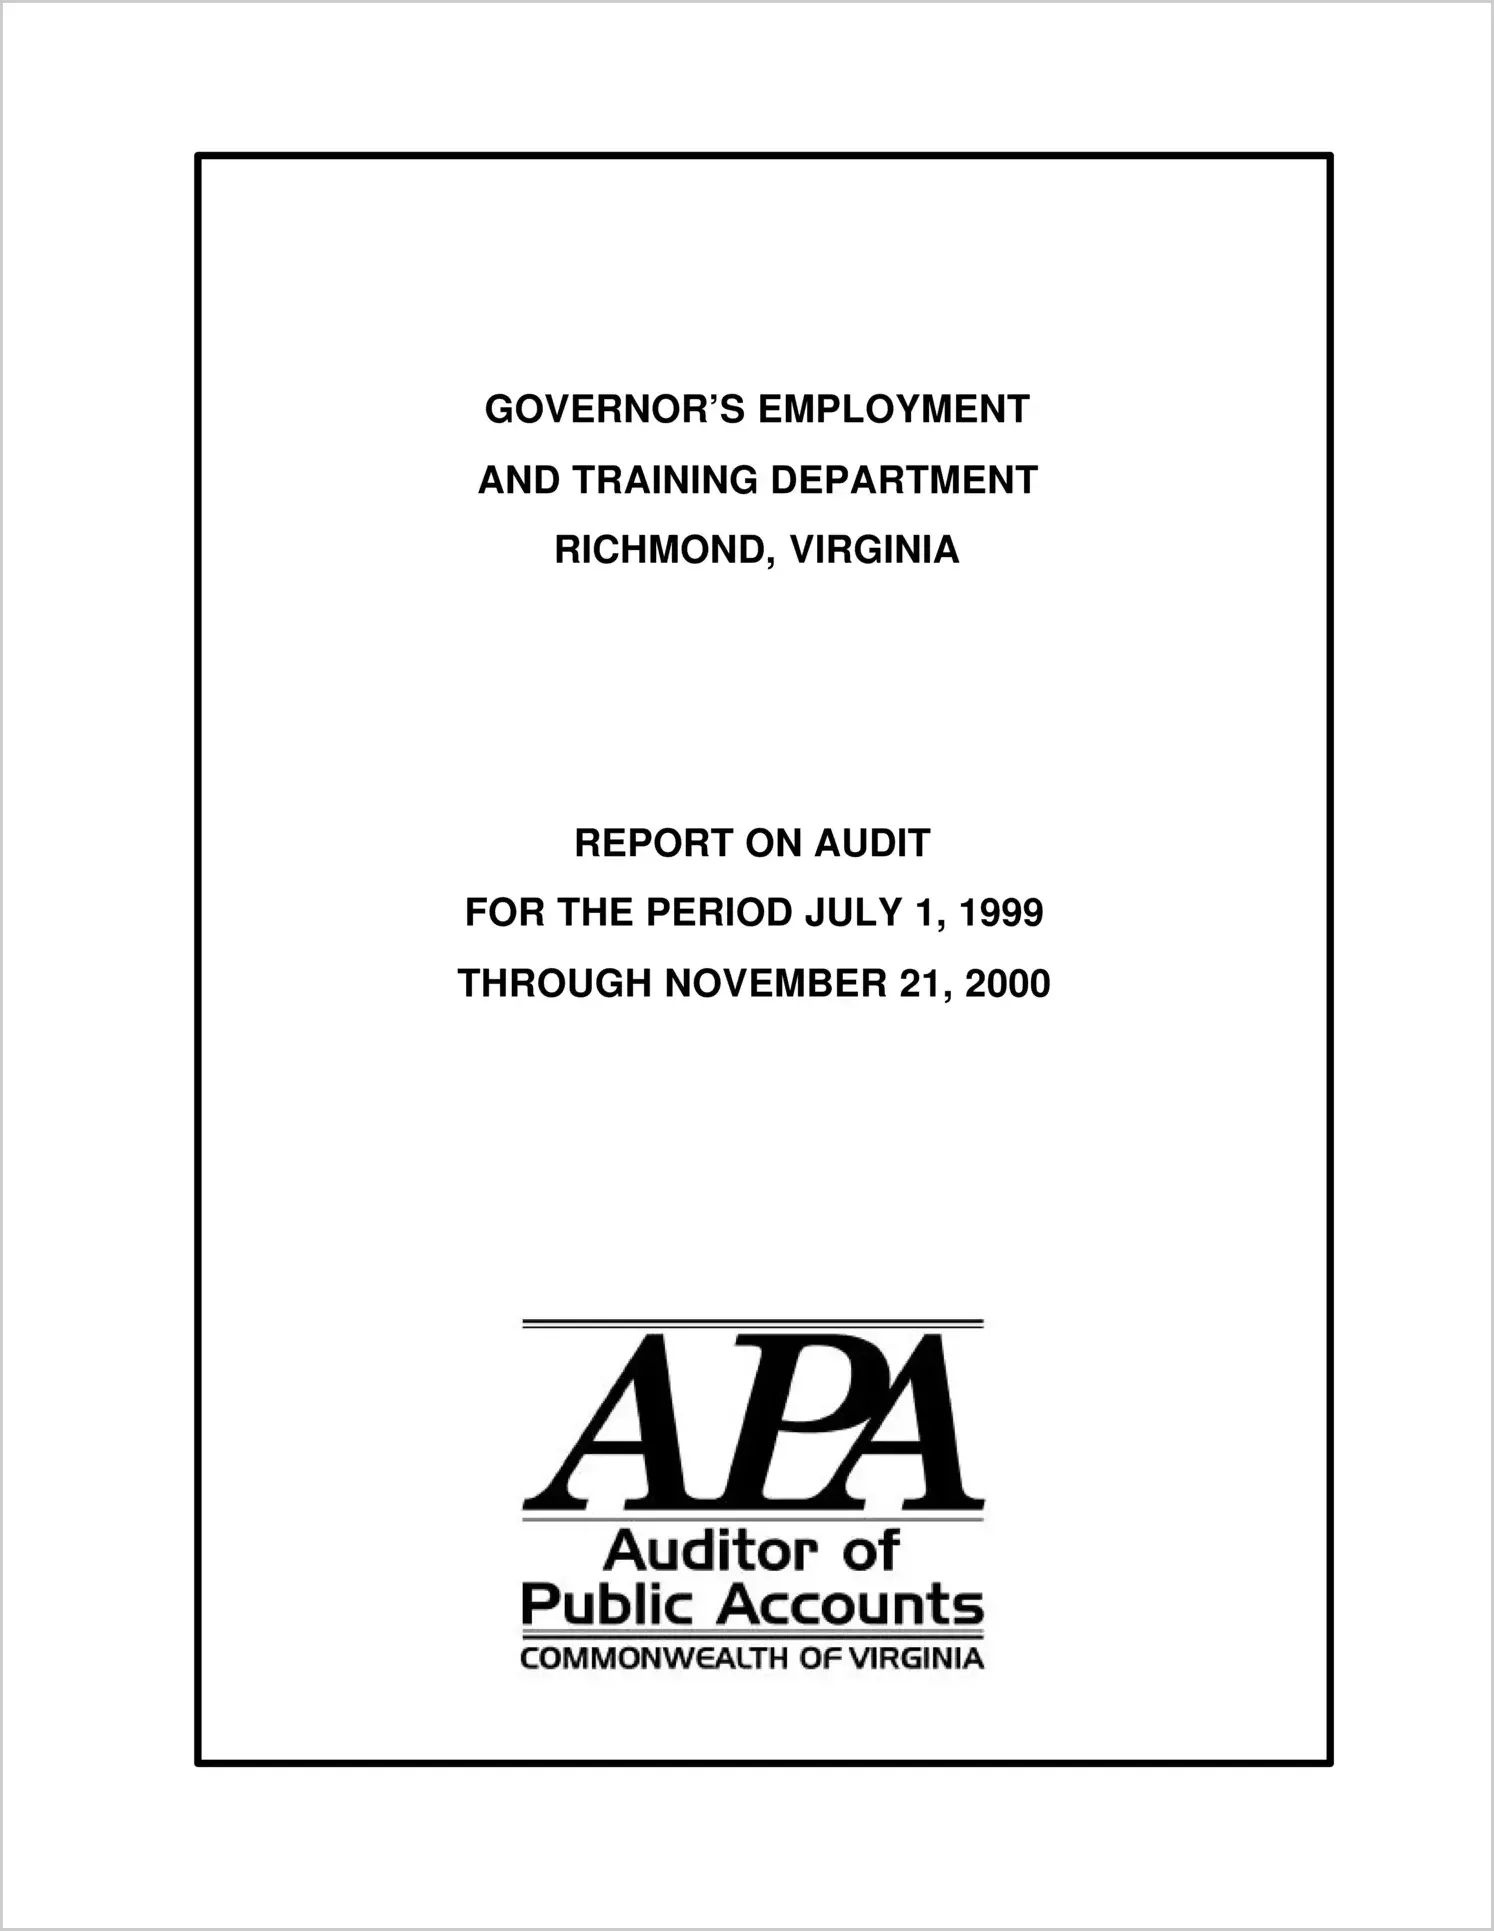 Governor`s Employment and Training Department for the period July 1, 1999 through November 21, 2000